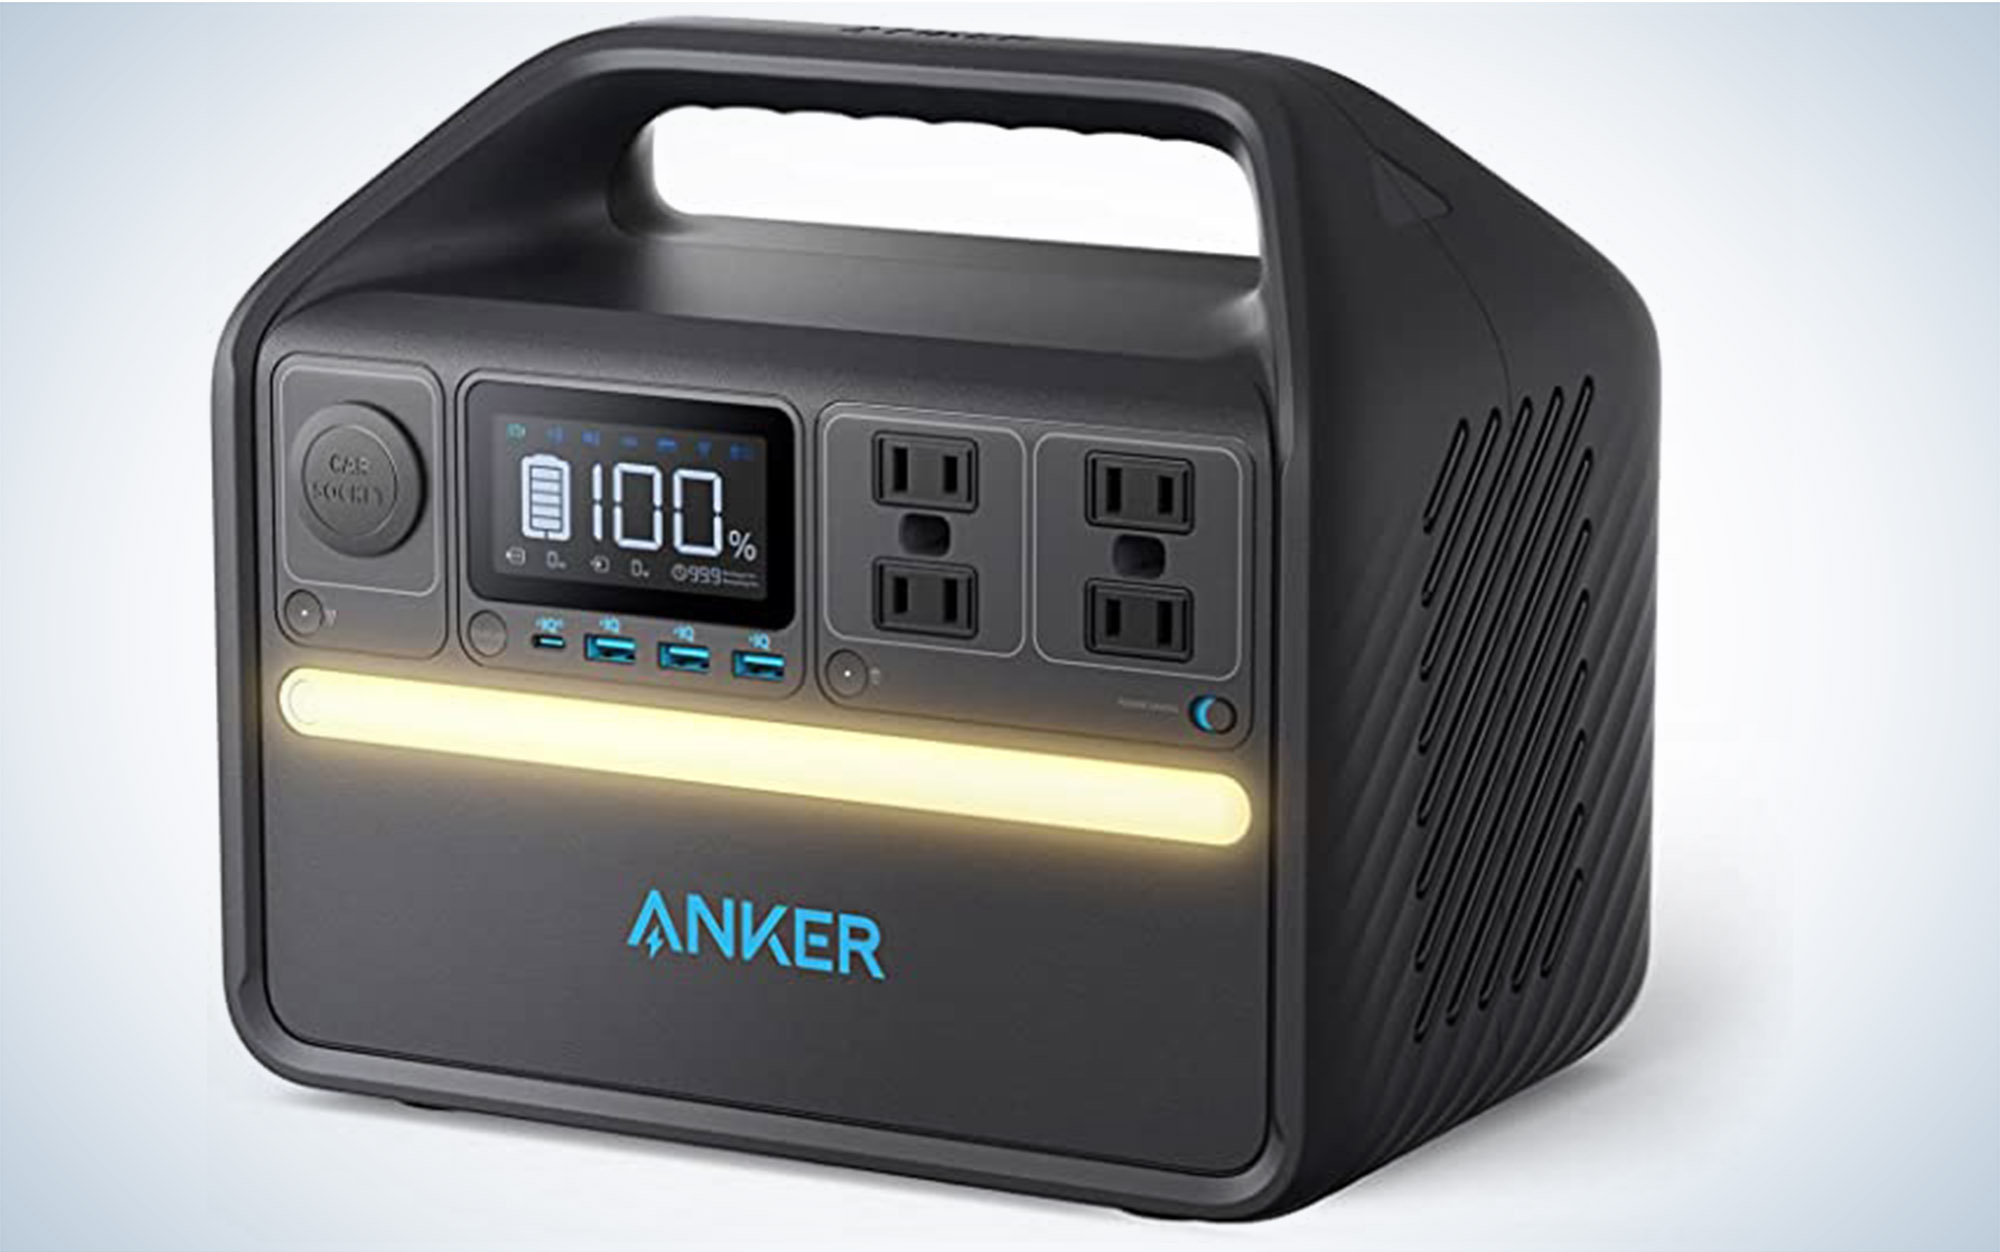 The Anker 535 is on sale.